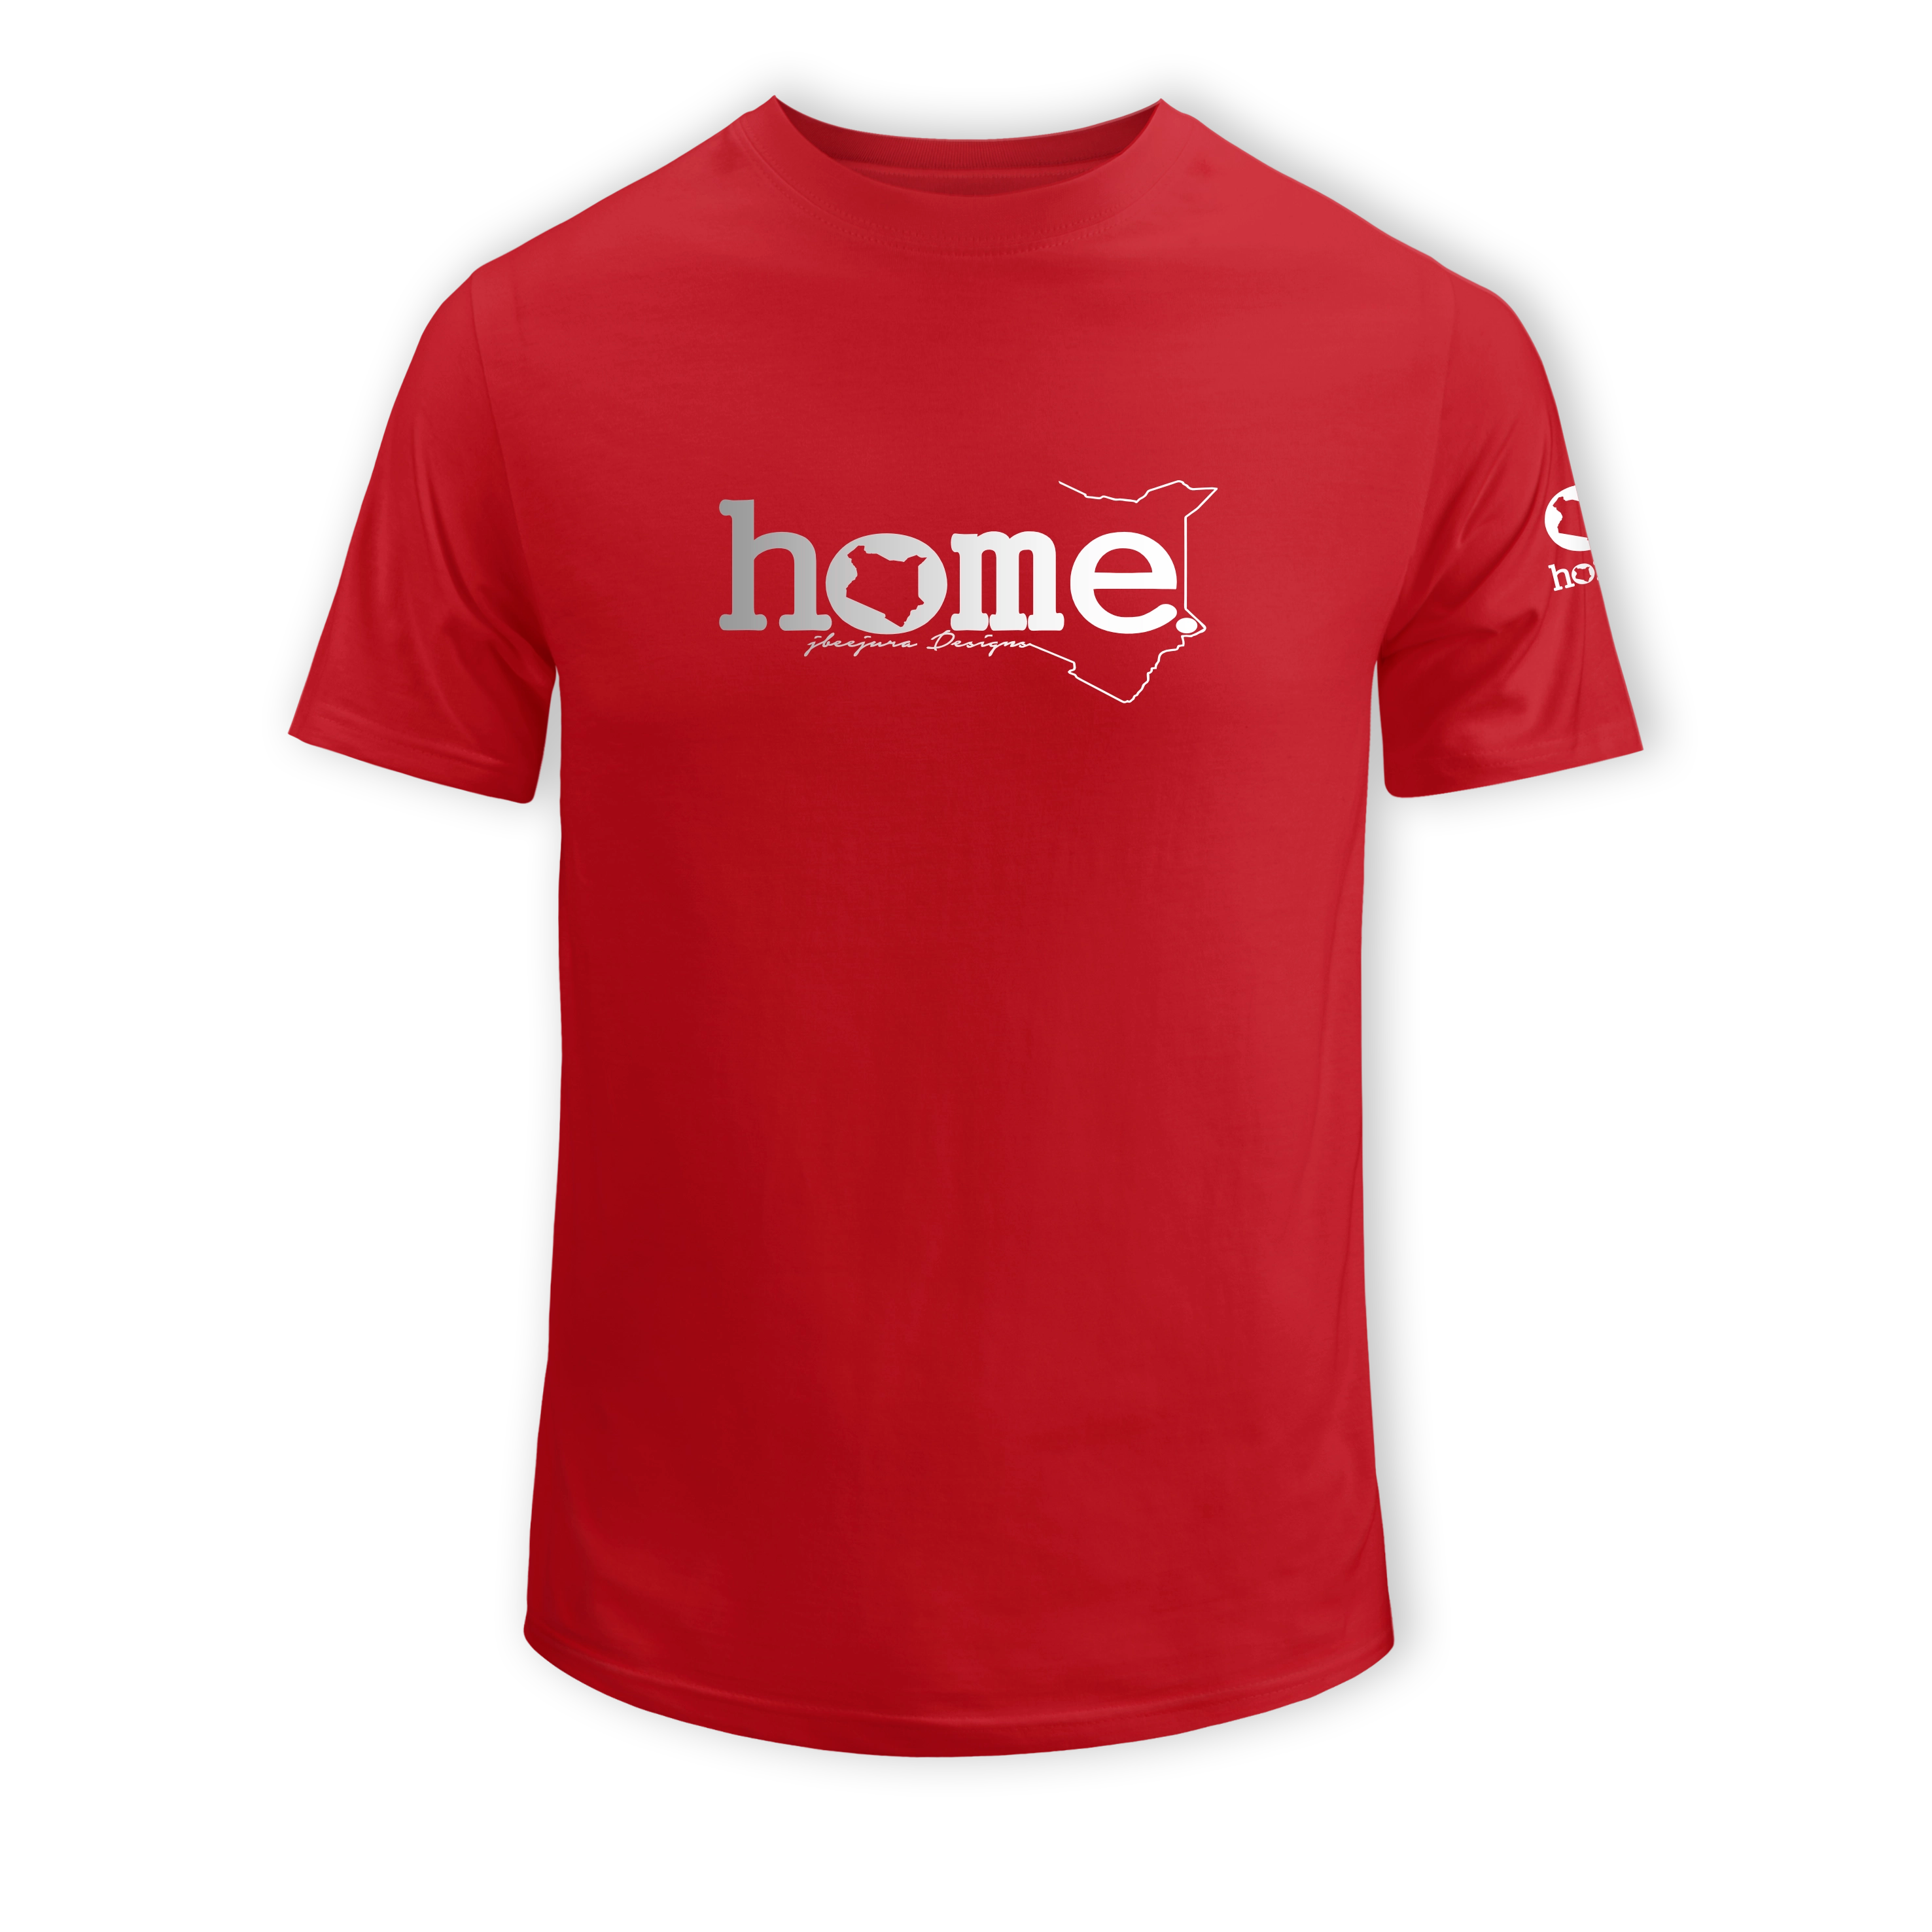 home_254 KIDS SHORT-SLEEVED RED T-SHIRT WITH A SILVER CLASSIC WORDSPRINT – COTTON PLUS FABRIC